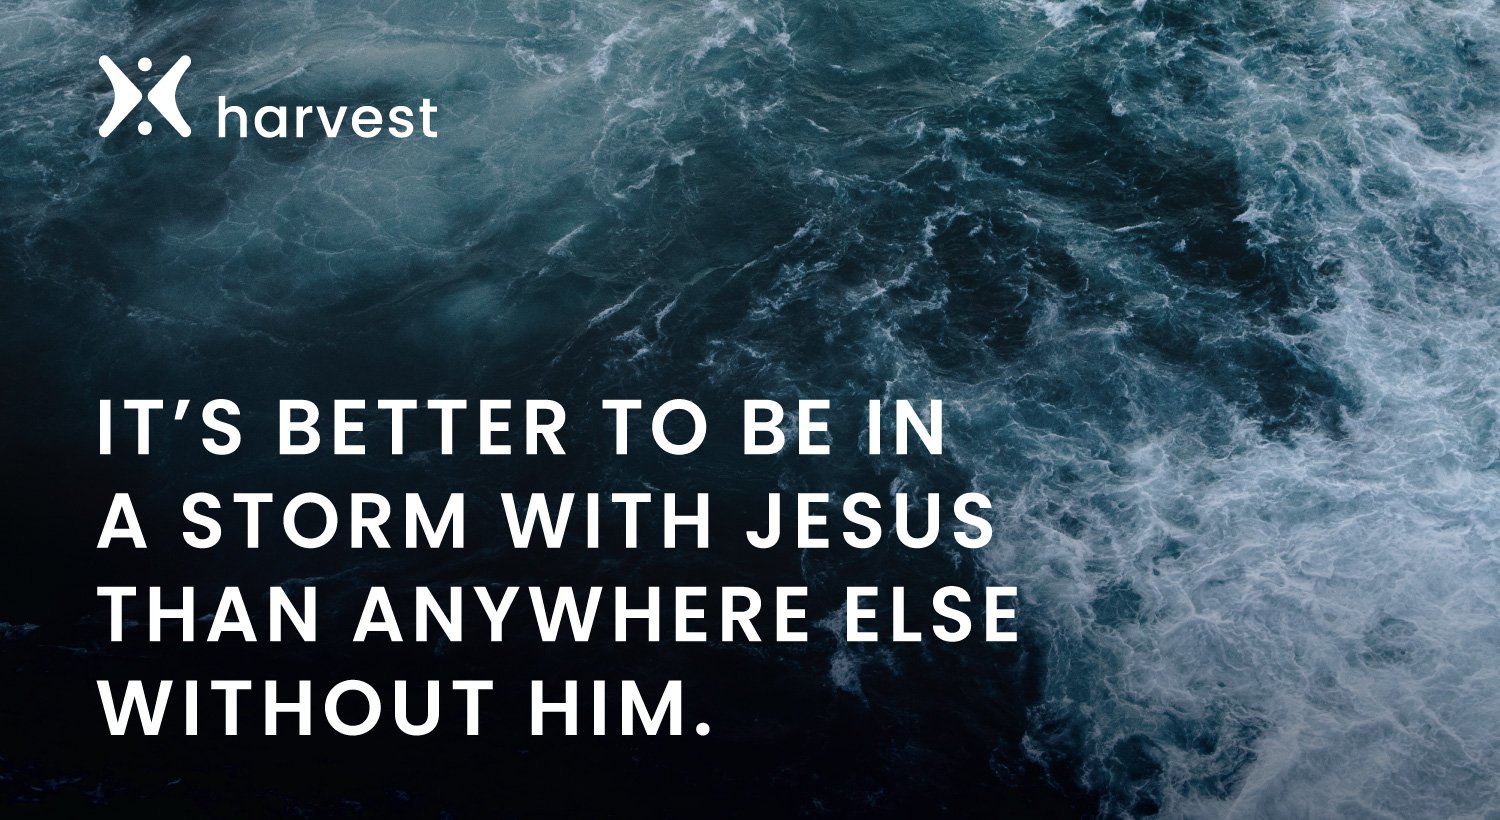 It’s better to be in a storm with Jesus than anywhere else without Him.